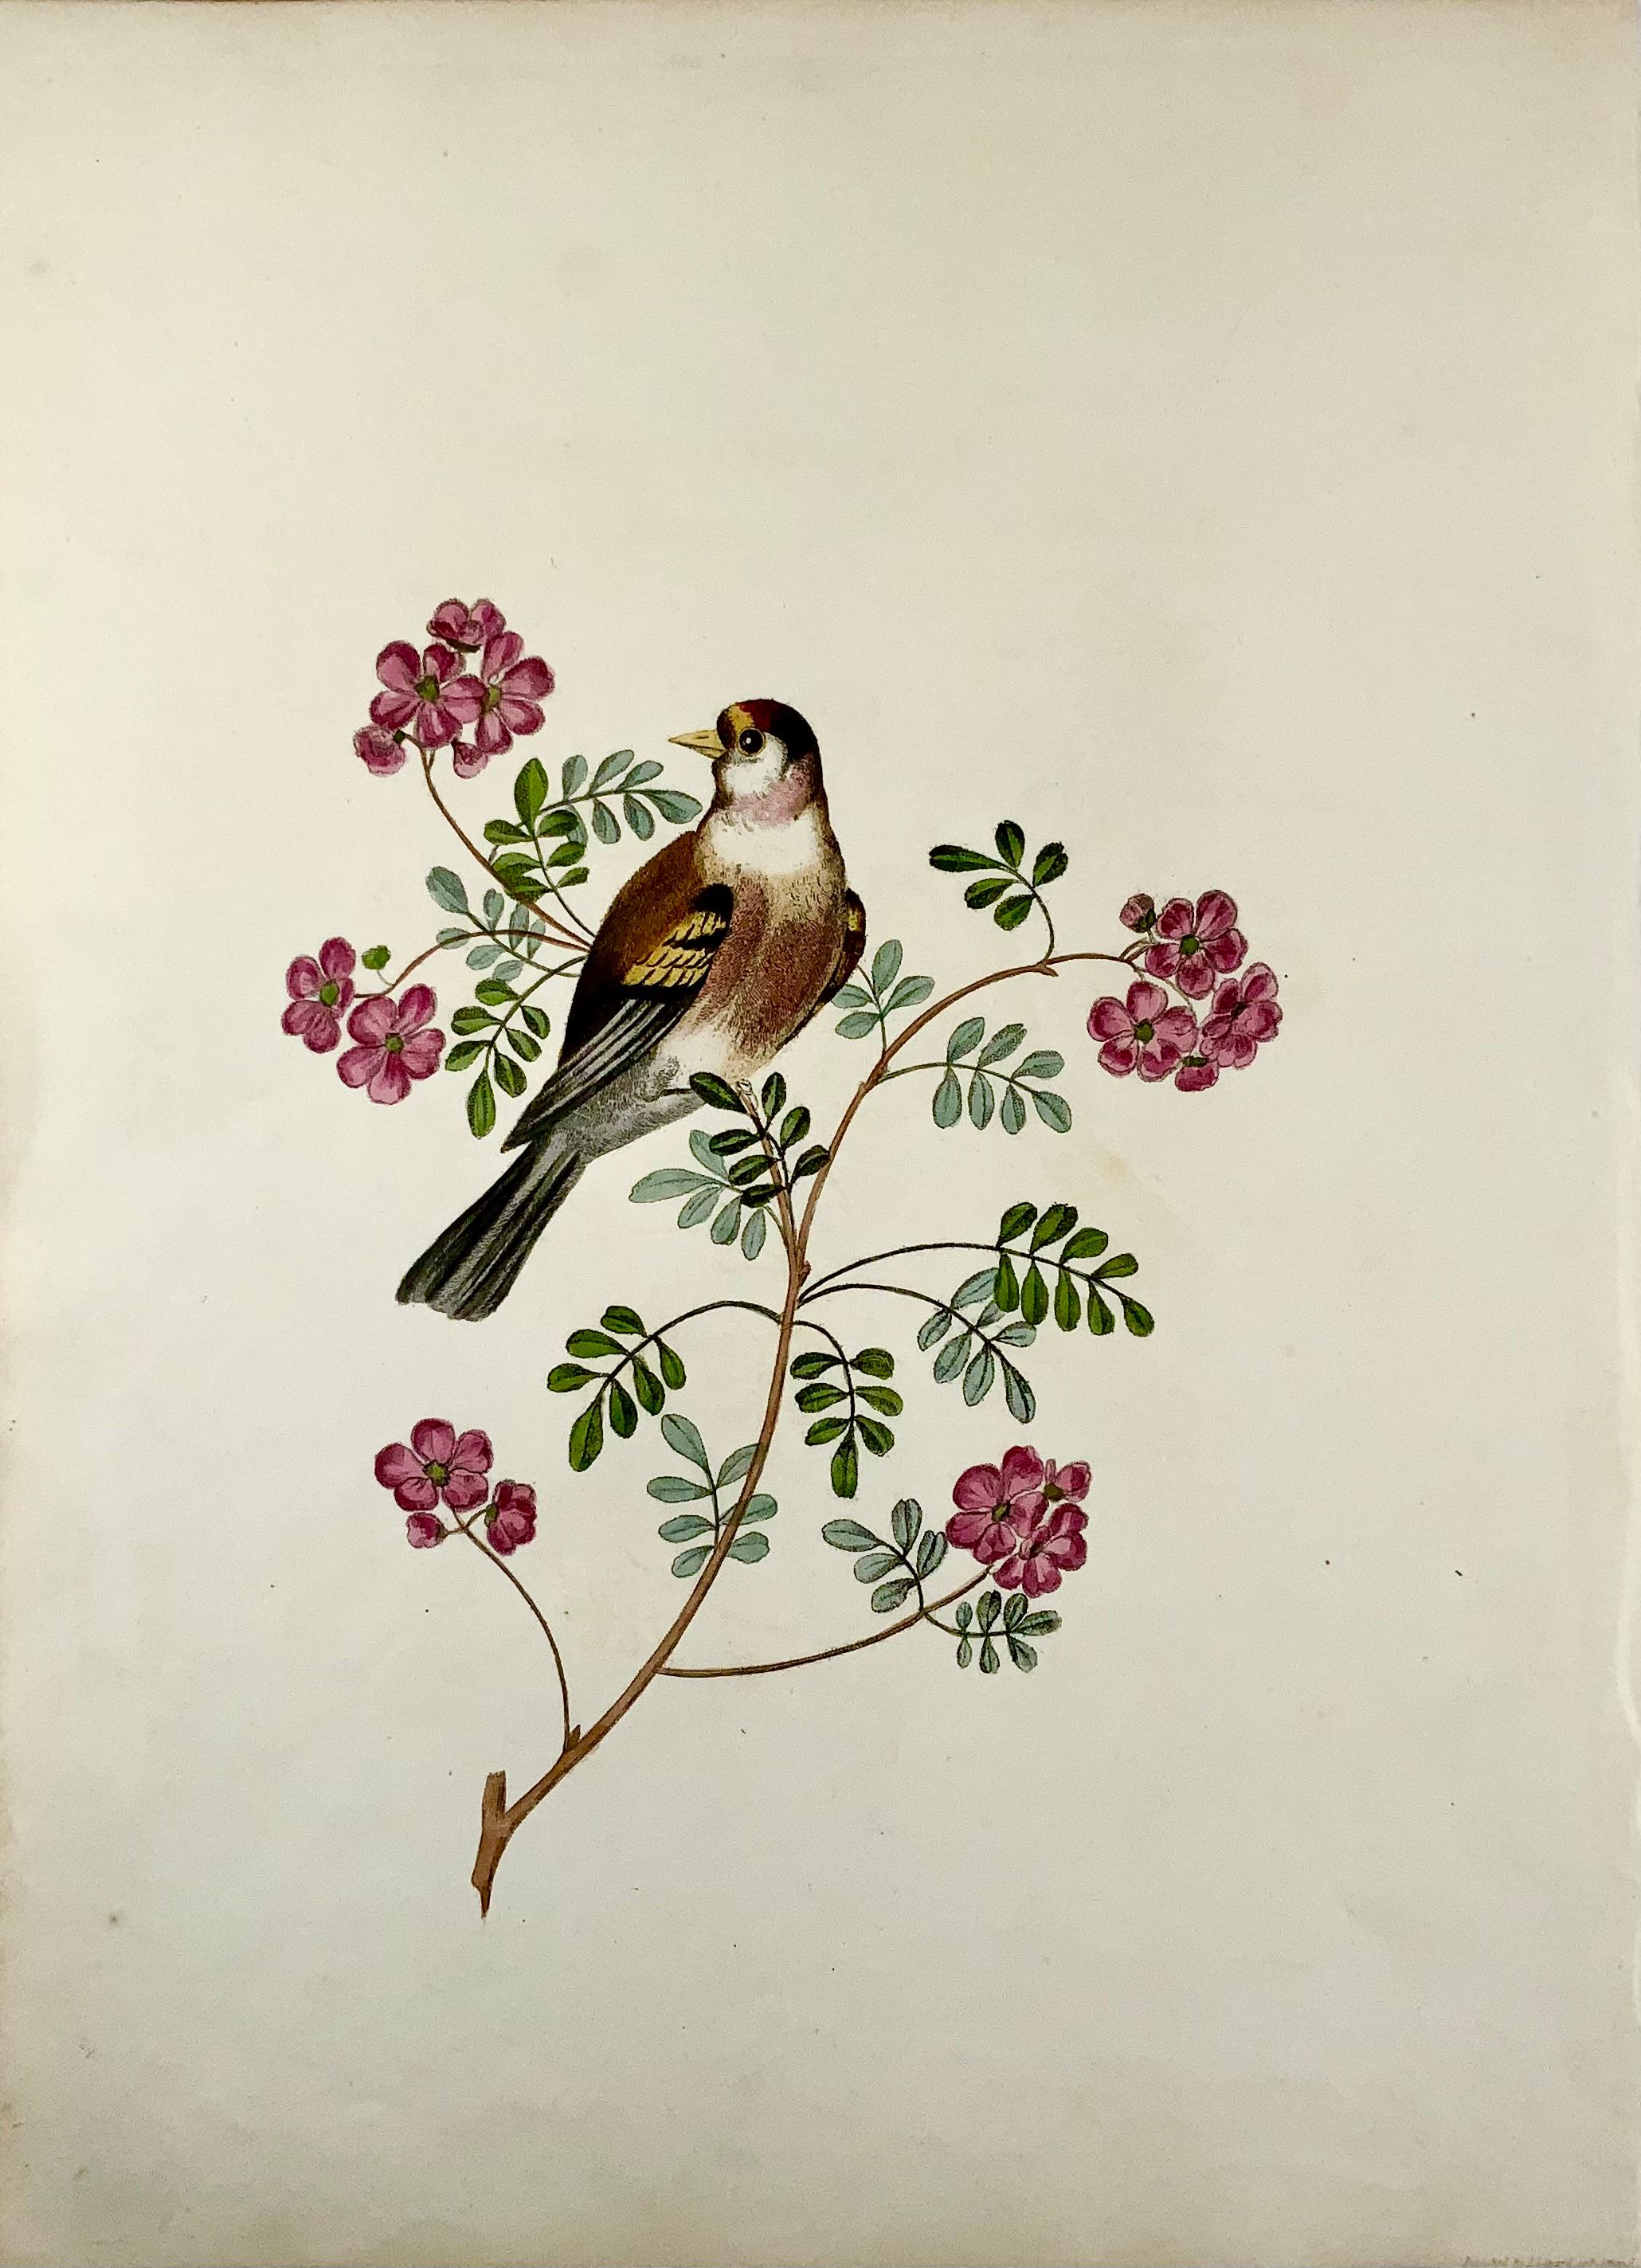 Goldfinch

Fine large folio stipple engraving with hand colour.

On Turkey Mills Wattman paper.

Overall dimensions: 35.3 x 26 cm

Issued in Brookshaw’s scarce monograph: Six birds, accurately drawn and coloured after nature, with full